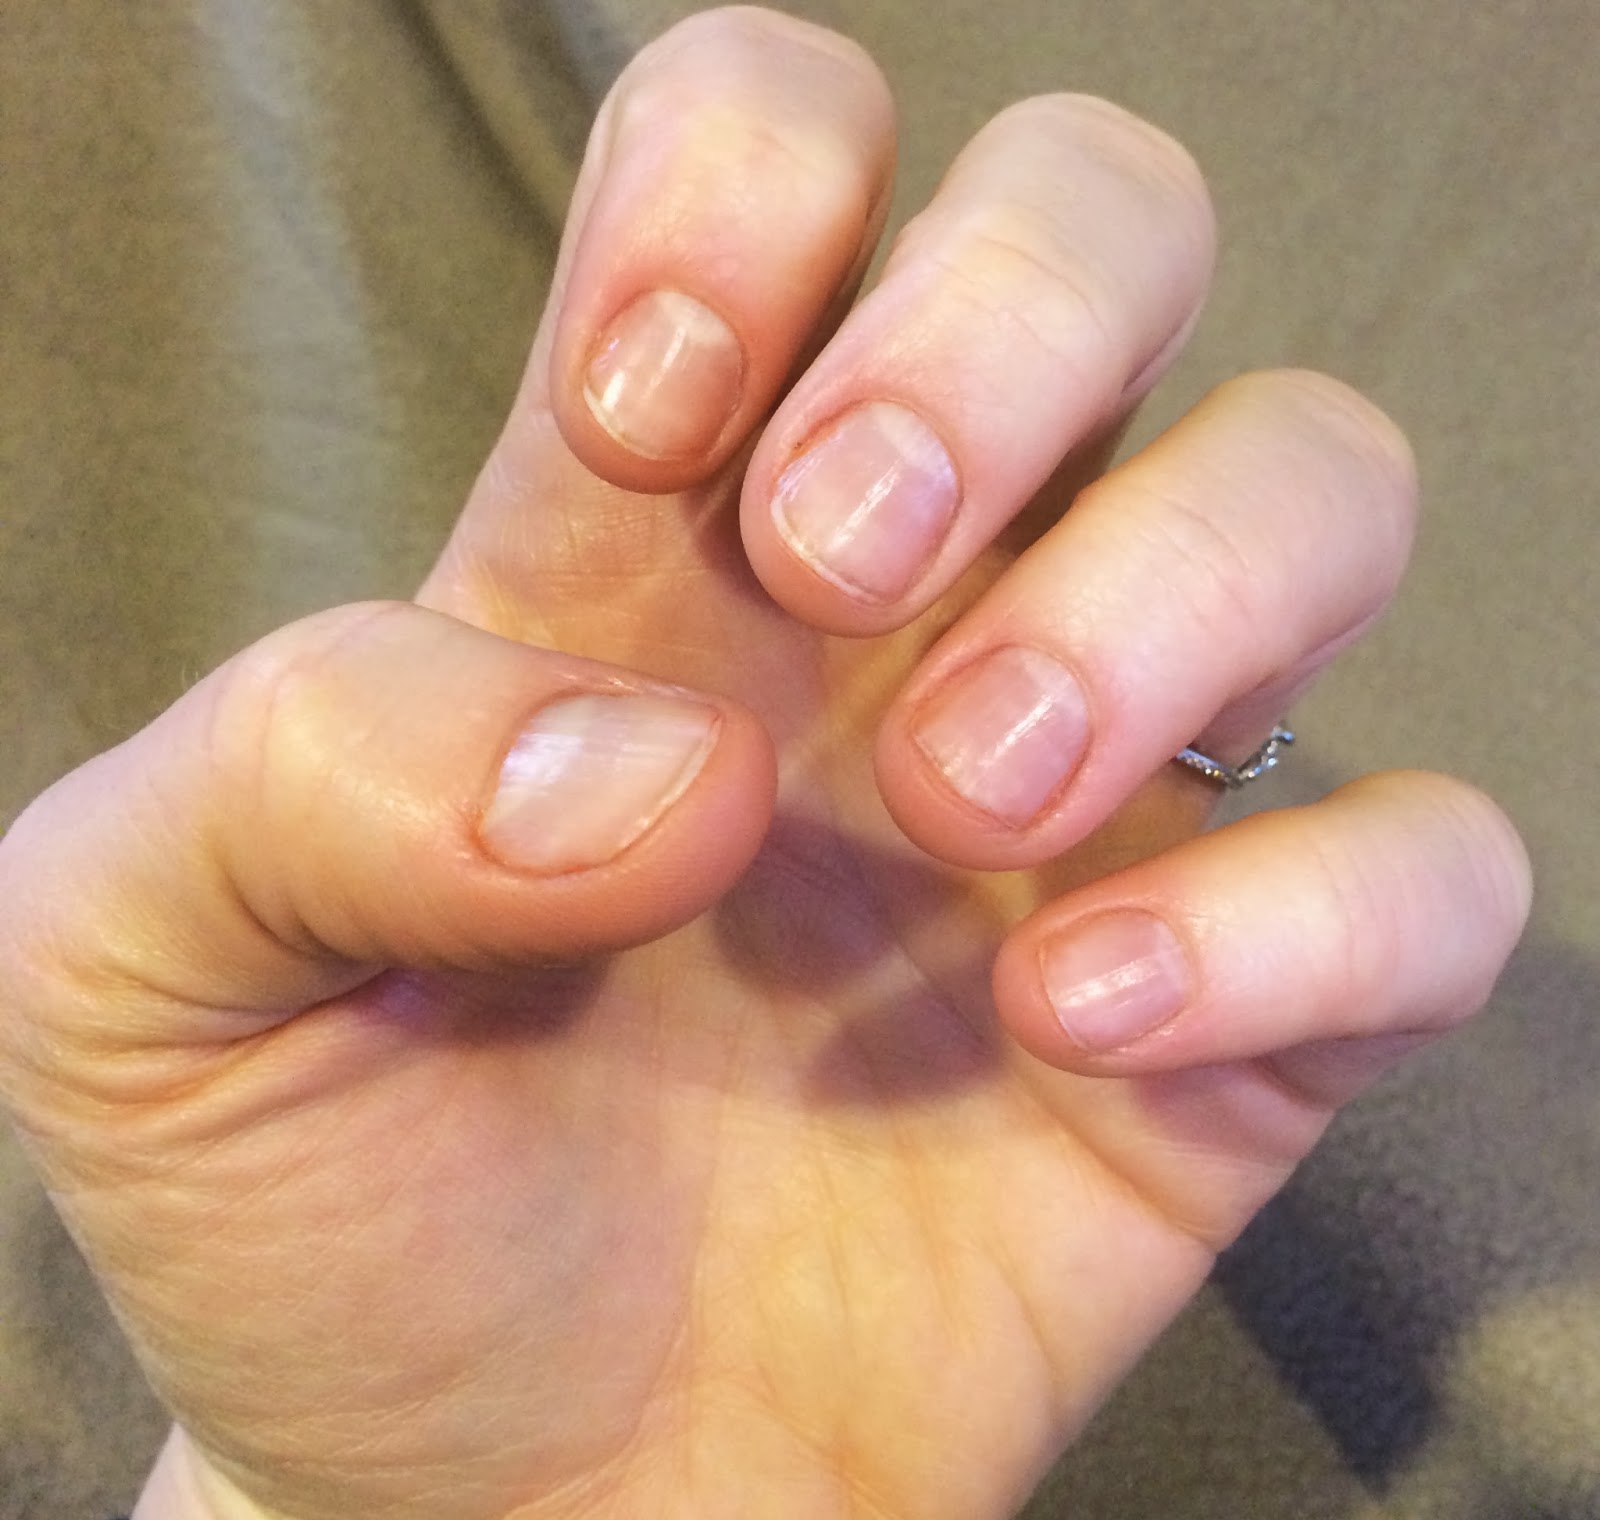 The ugly nail project - week 1 update.